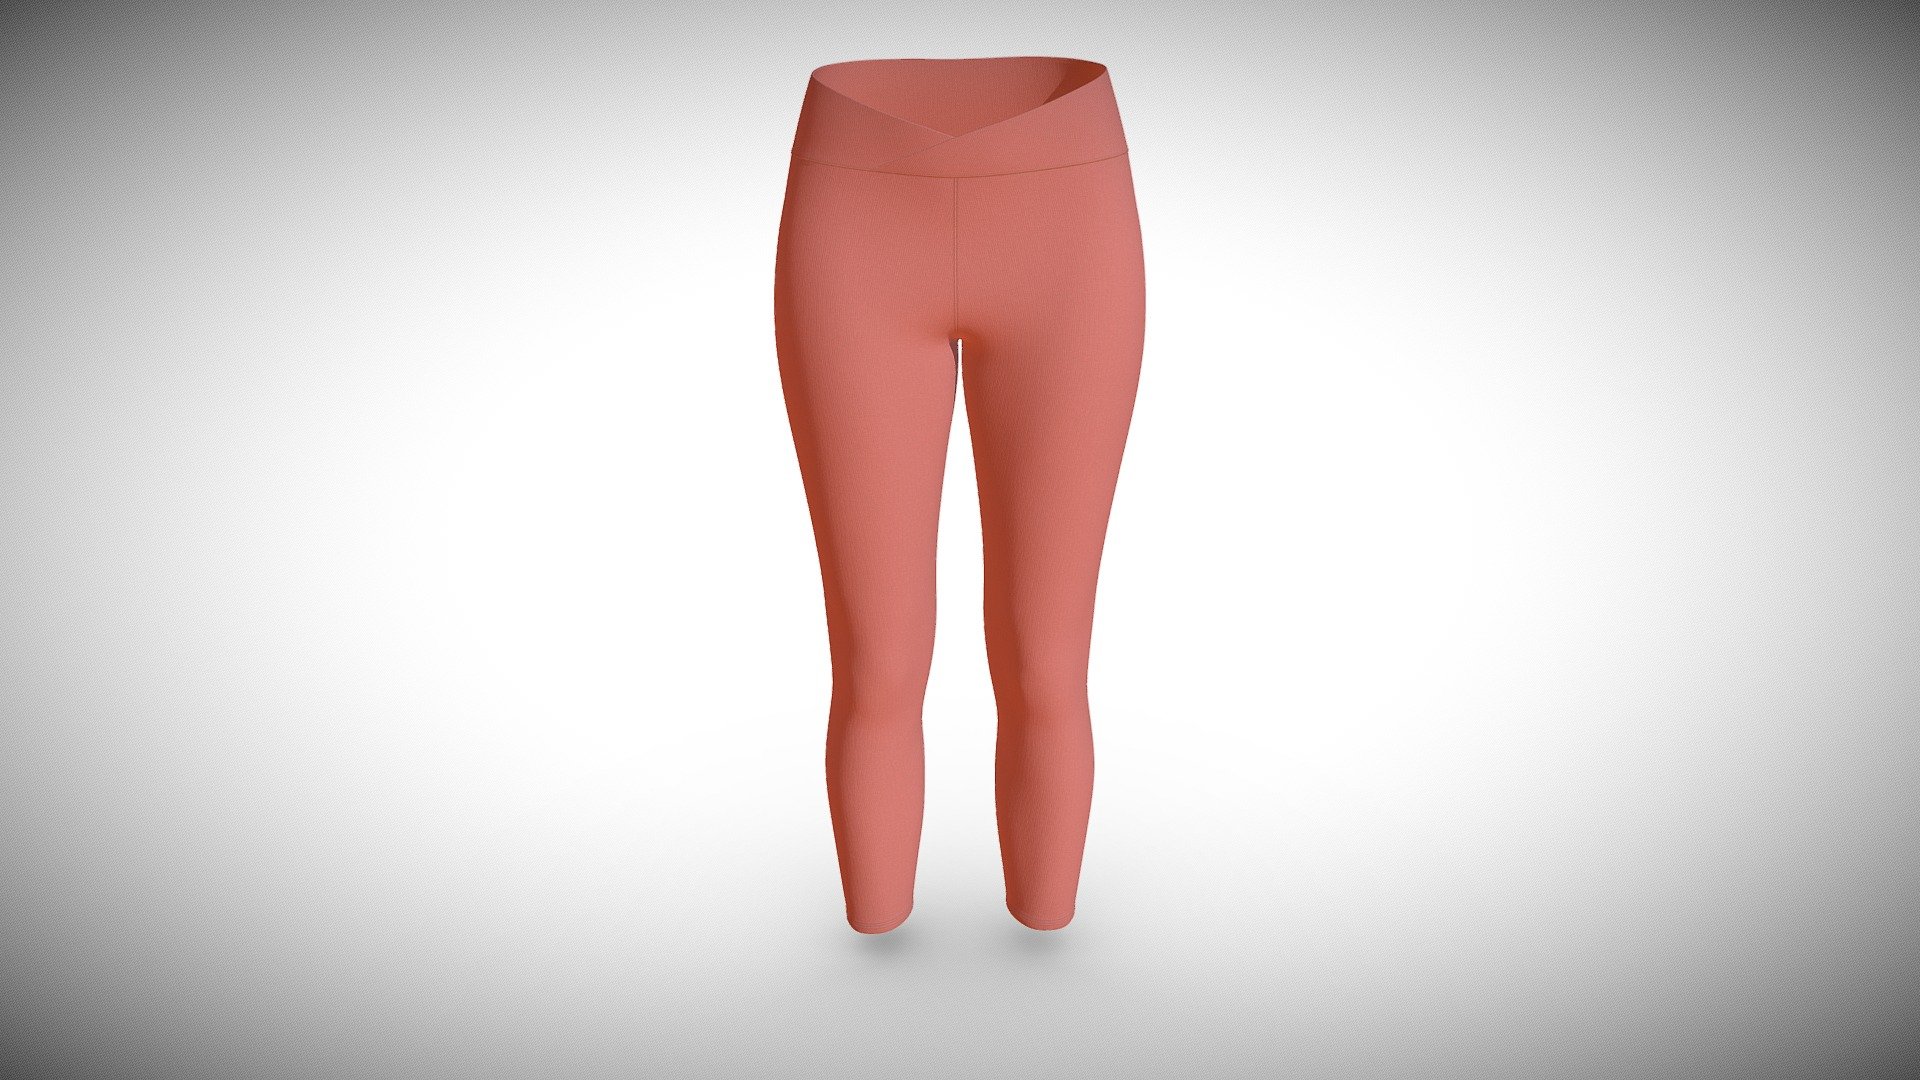 Cloth Title = Women's Mid-Waisted Leggings 

SKU = DG100138 

Category = Women 

Product Type = Leggings 

Cloth Length = Regular 

Body Fit = Skinny Fit 

Occasion = Activewear  

Waist Rise = Mid Rise 


Our Services:

3D Apparel Design.

OBJ,FBX,GLTF Making with High/Low Poly.

Fabric Digitalization.

Mockup making.

3D Teck Pack.

Pattern Making.

2D Illustration.

Cloth Animation and 360 Spin Video.


Contact us:- 

Email: info@digitalfashionwear.com 

Website: https://digitalfashionwear.com 


We designed all the types of cloth specially focused on product visualization, e-commerce, fitting, and production. 

We will design: 

T-shirts 

Polo shirts 

Hoodies 

Sweatshirt 

Jackets 

Shirts 

TankTops 

Trousers 

Bras 

Underwear 

Blazer 

Aprons 

Leggings 

and All Fashion items. 





Our goal is to make sure what we provide you, meets your demand 3d model